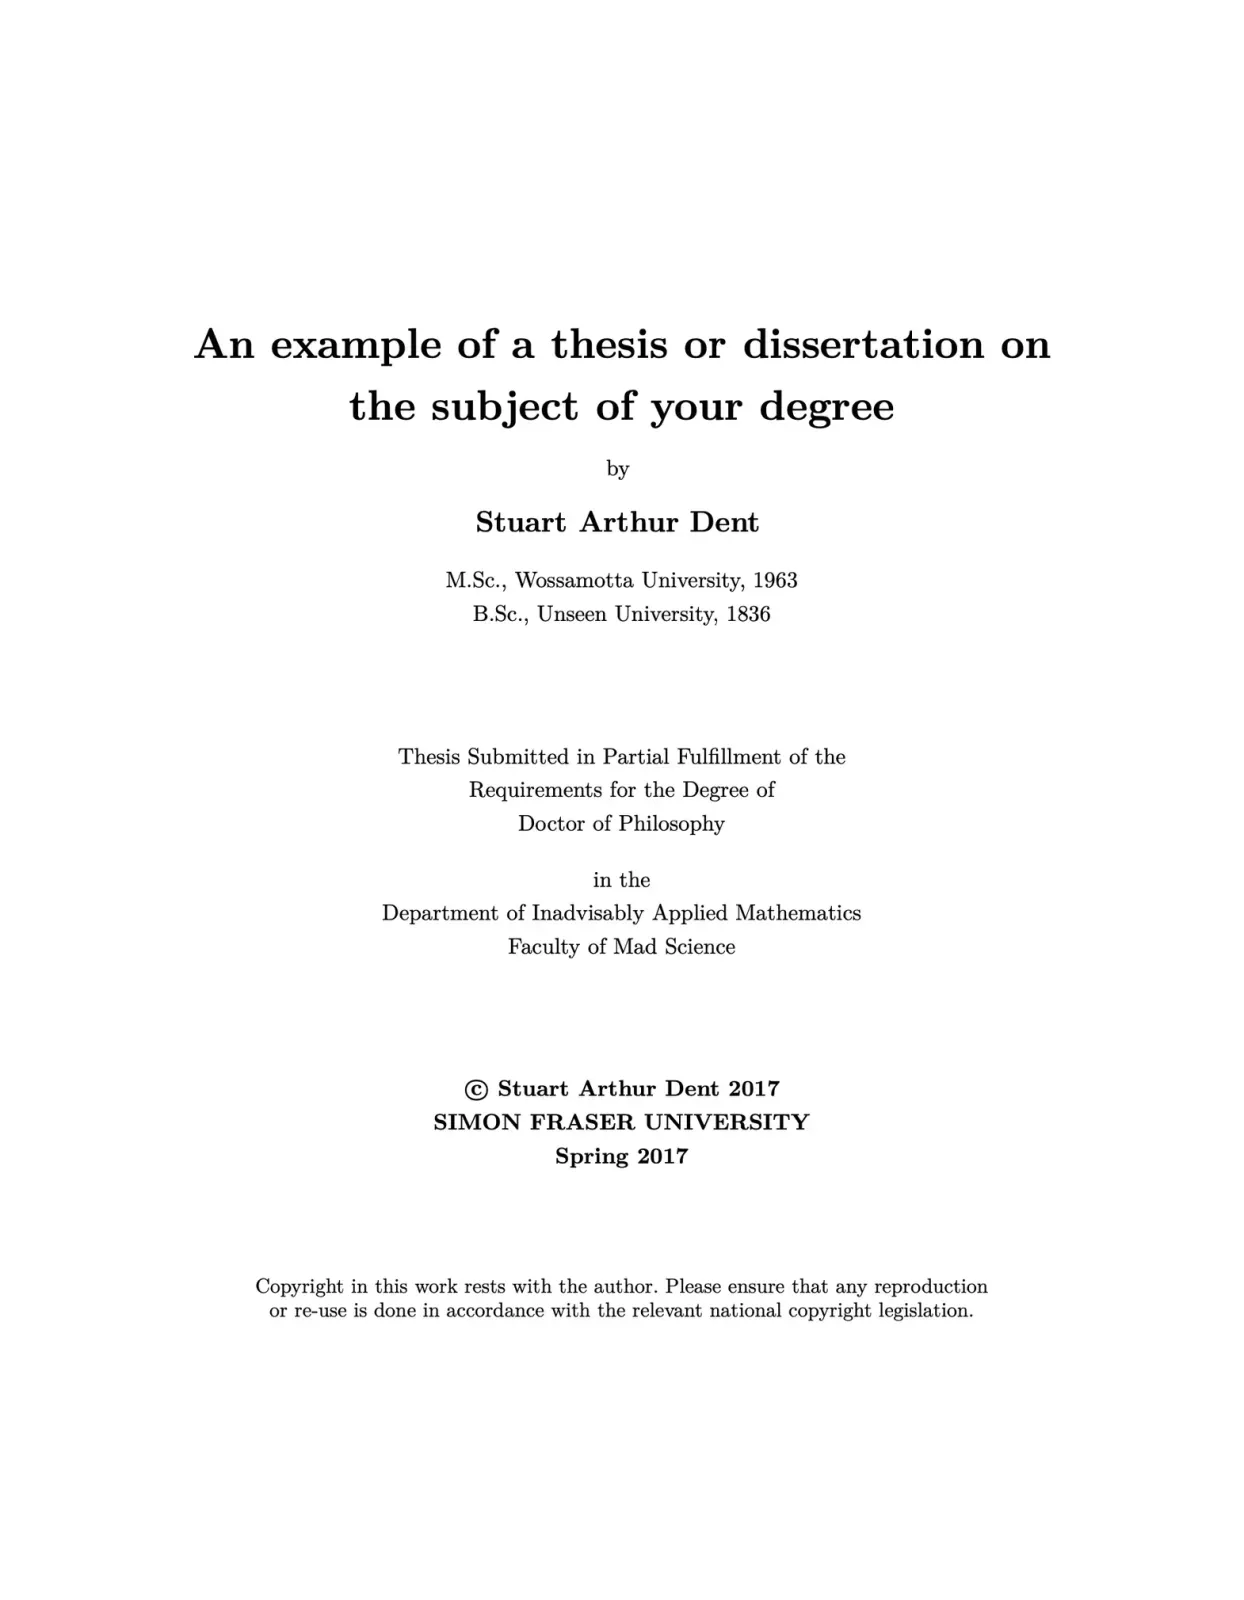 The cover page of the thesis template